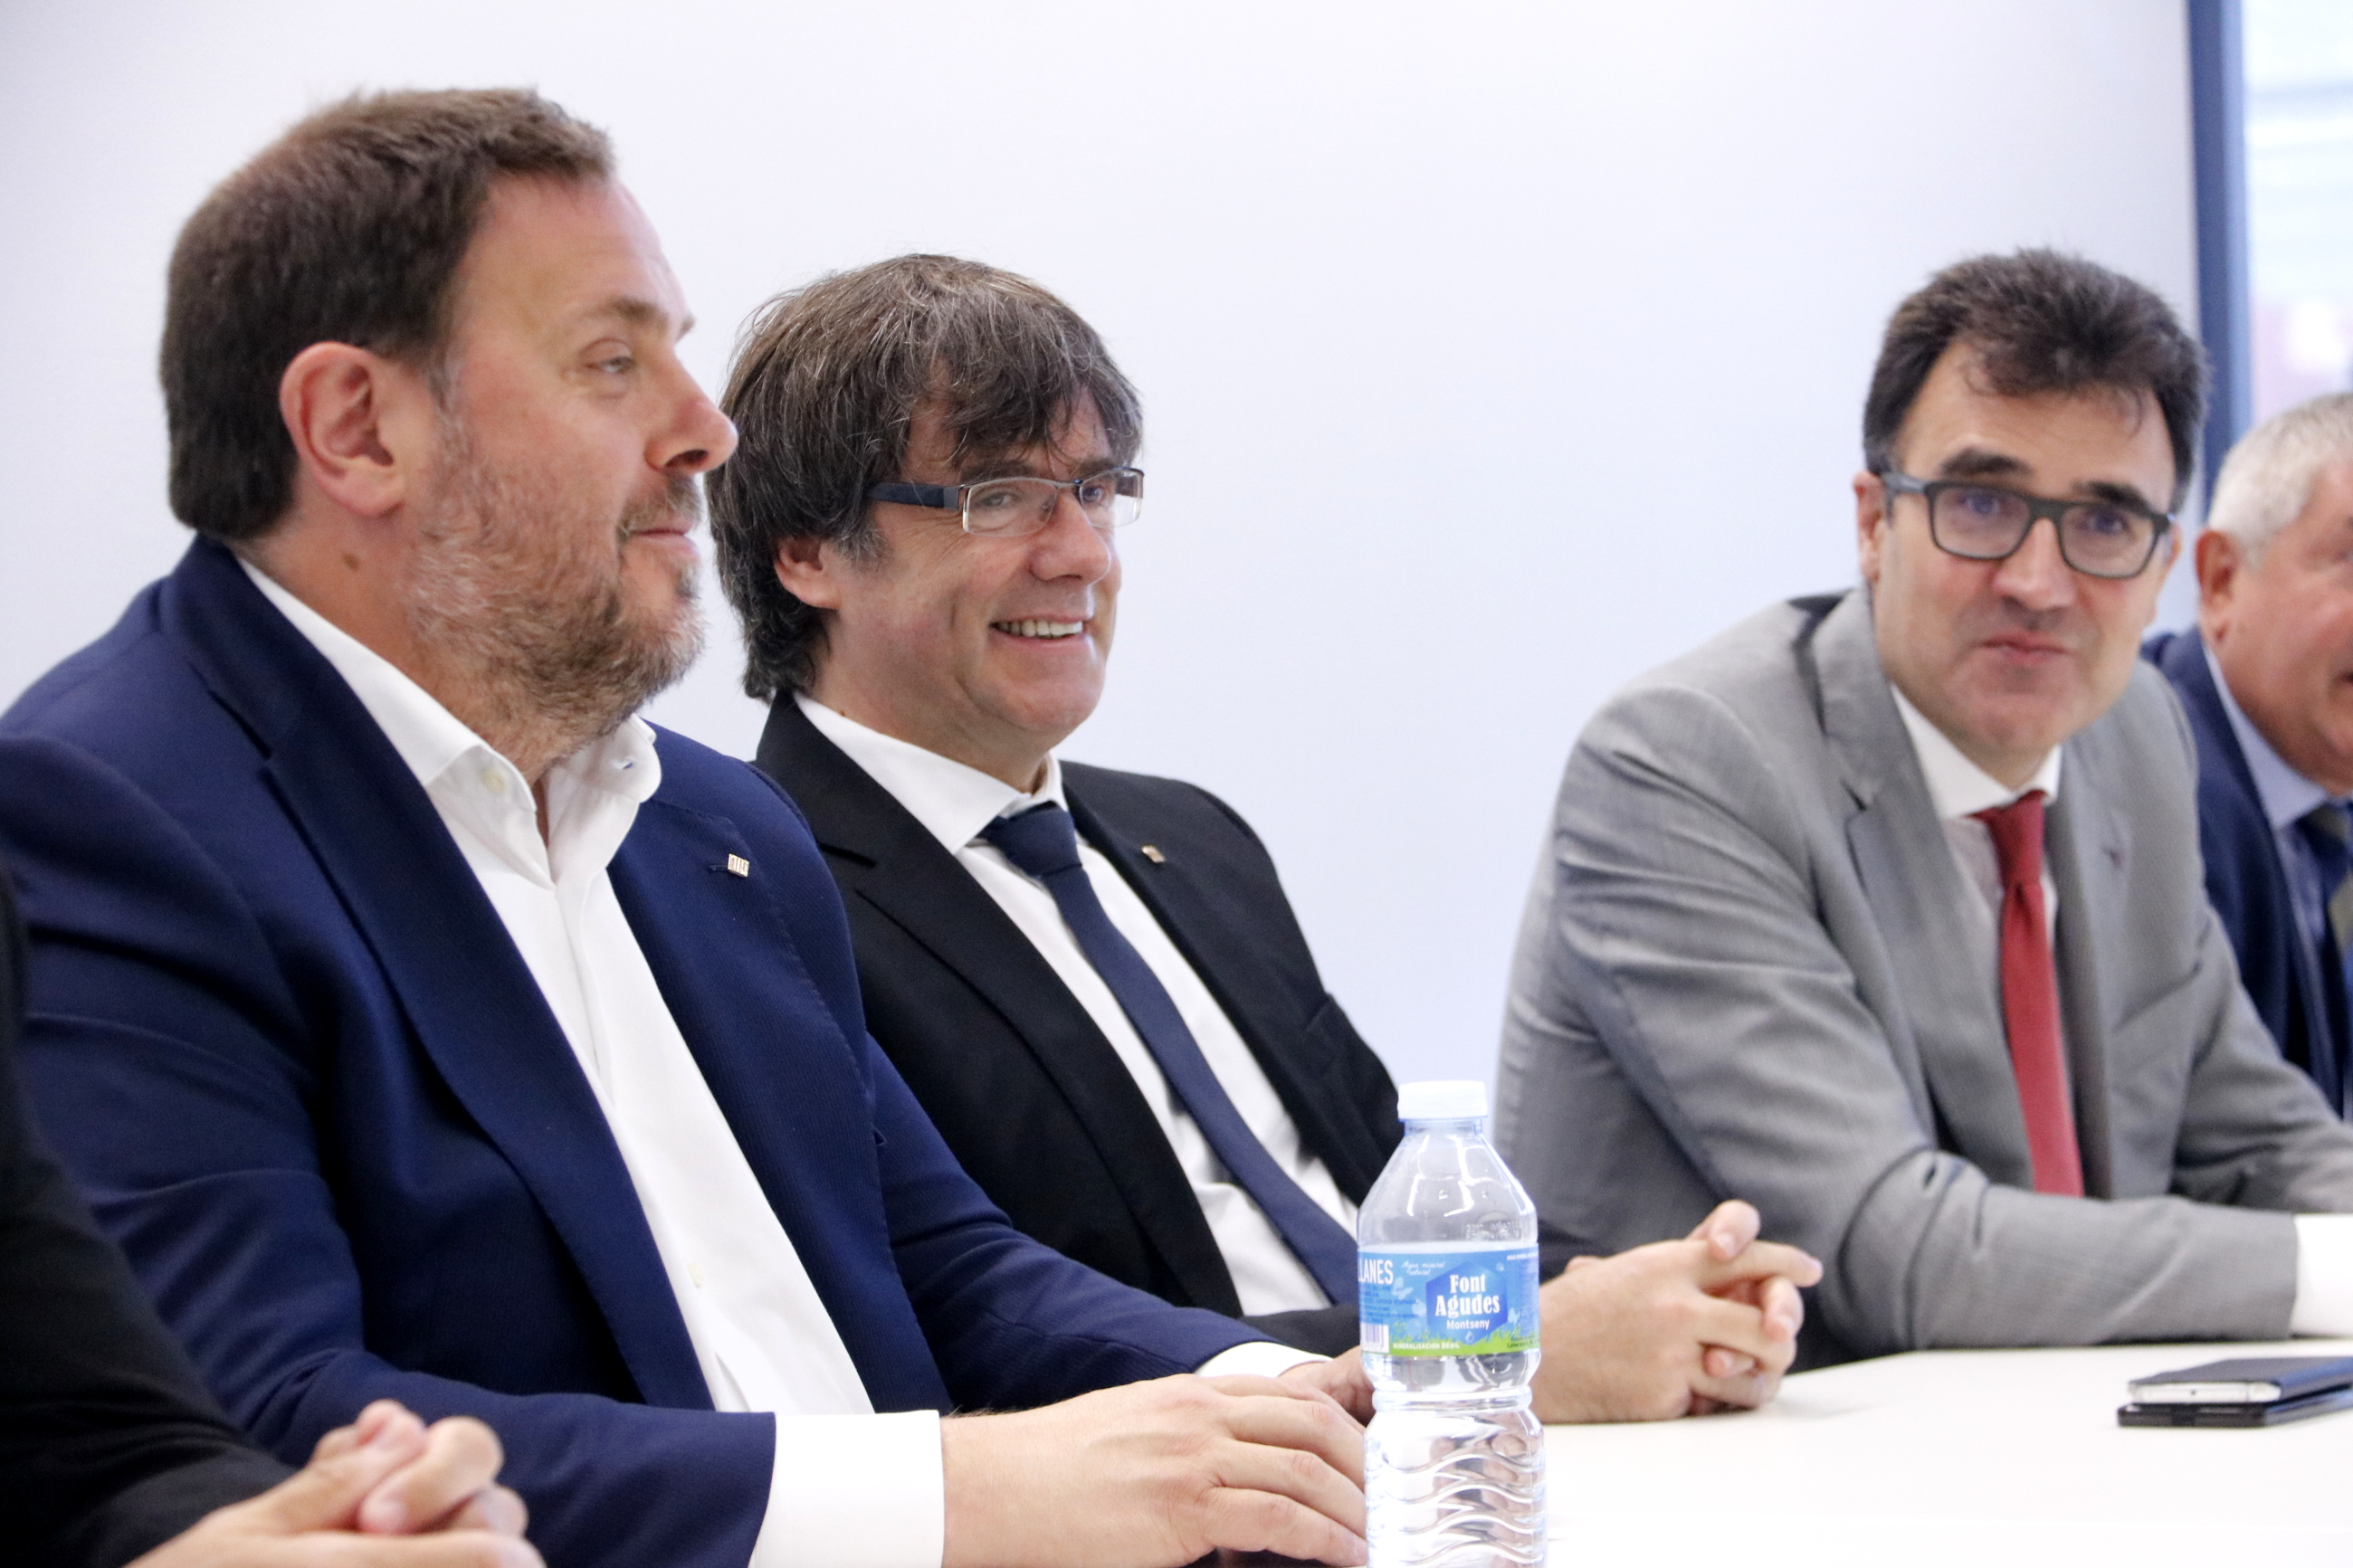 Catalan president, Carles Puigdemont (center), with vice president, Oriol Junqueras (left), and tax secretary, Lluís Salvadó (by ACN)